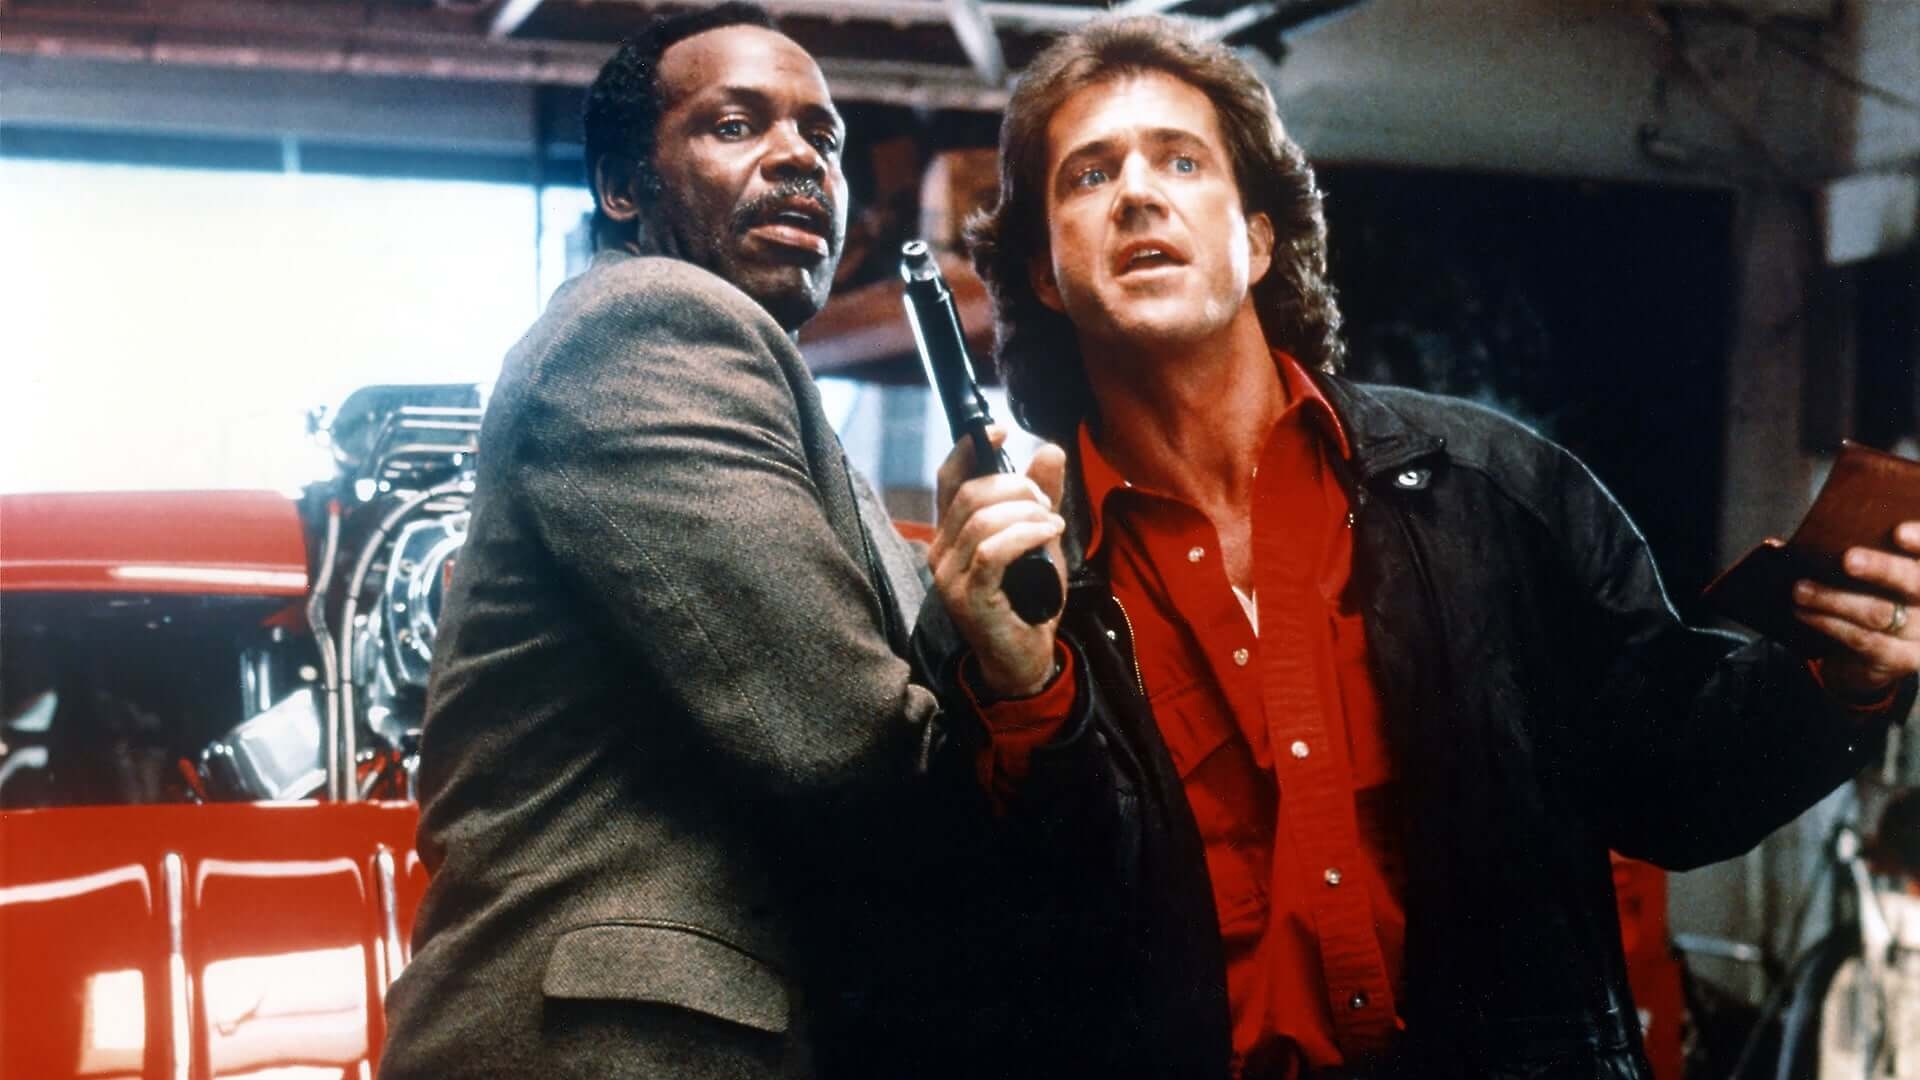 Lethal Weapon, Movies, Crime Action, Copy, 1920x1080 Full HD Desktop